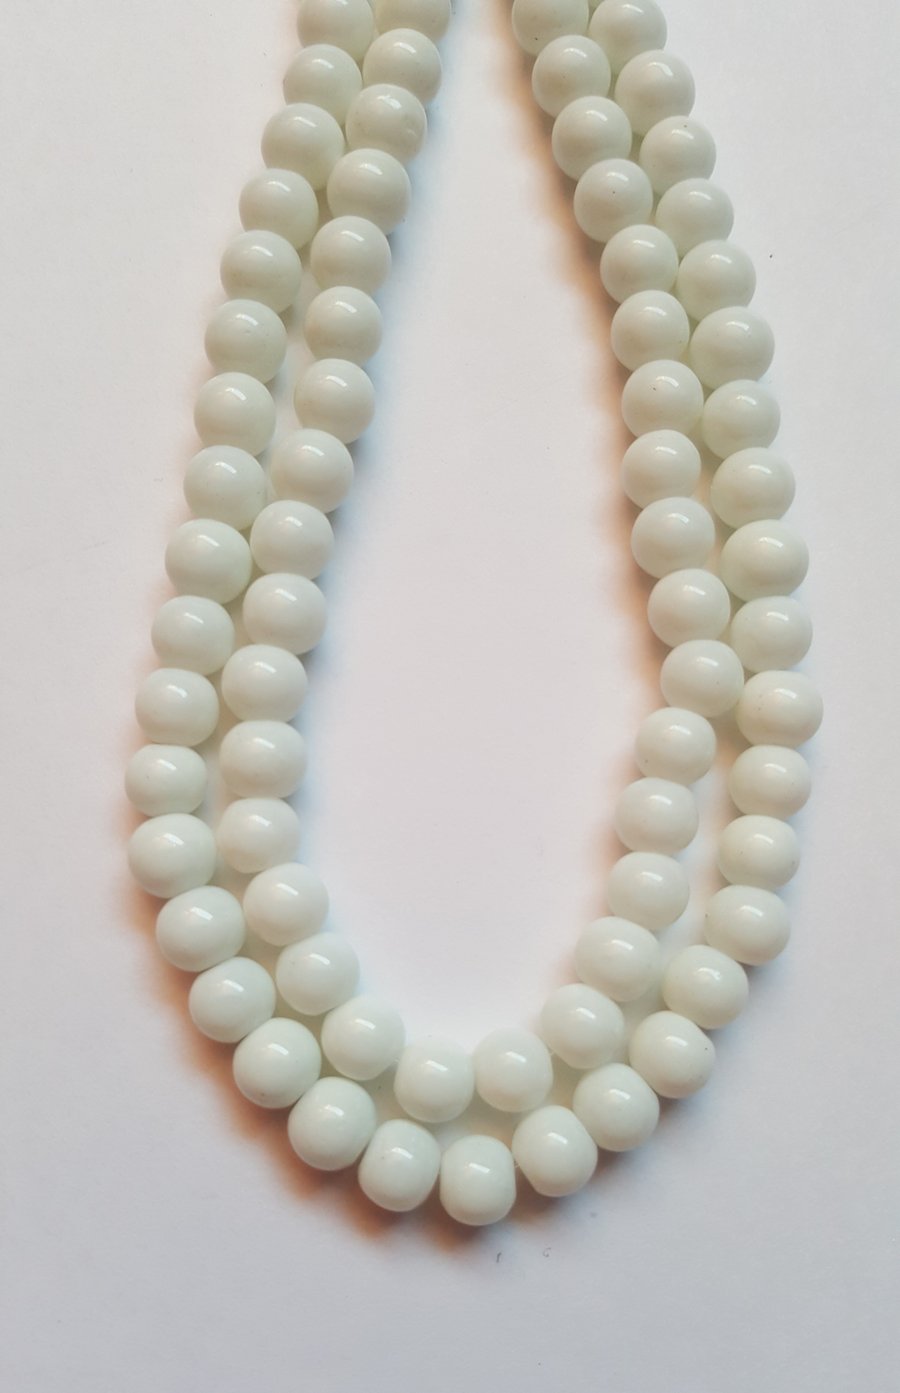 50 x Baked Glass Beads - Round - 6mm - White 